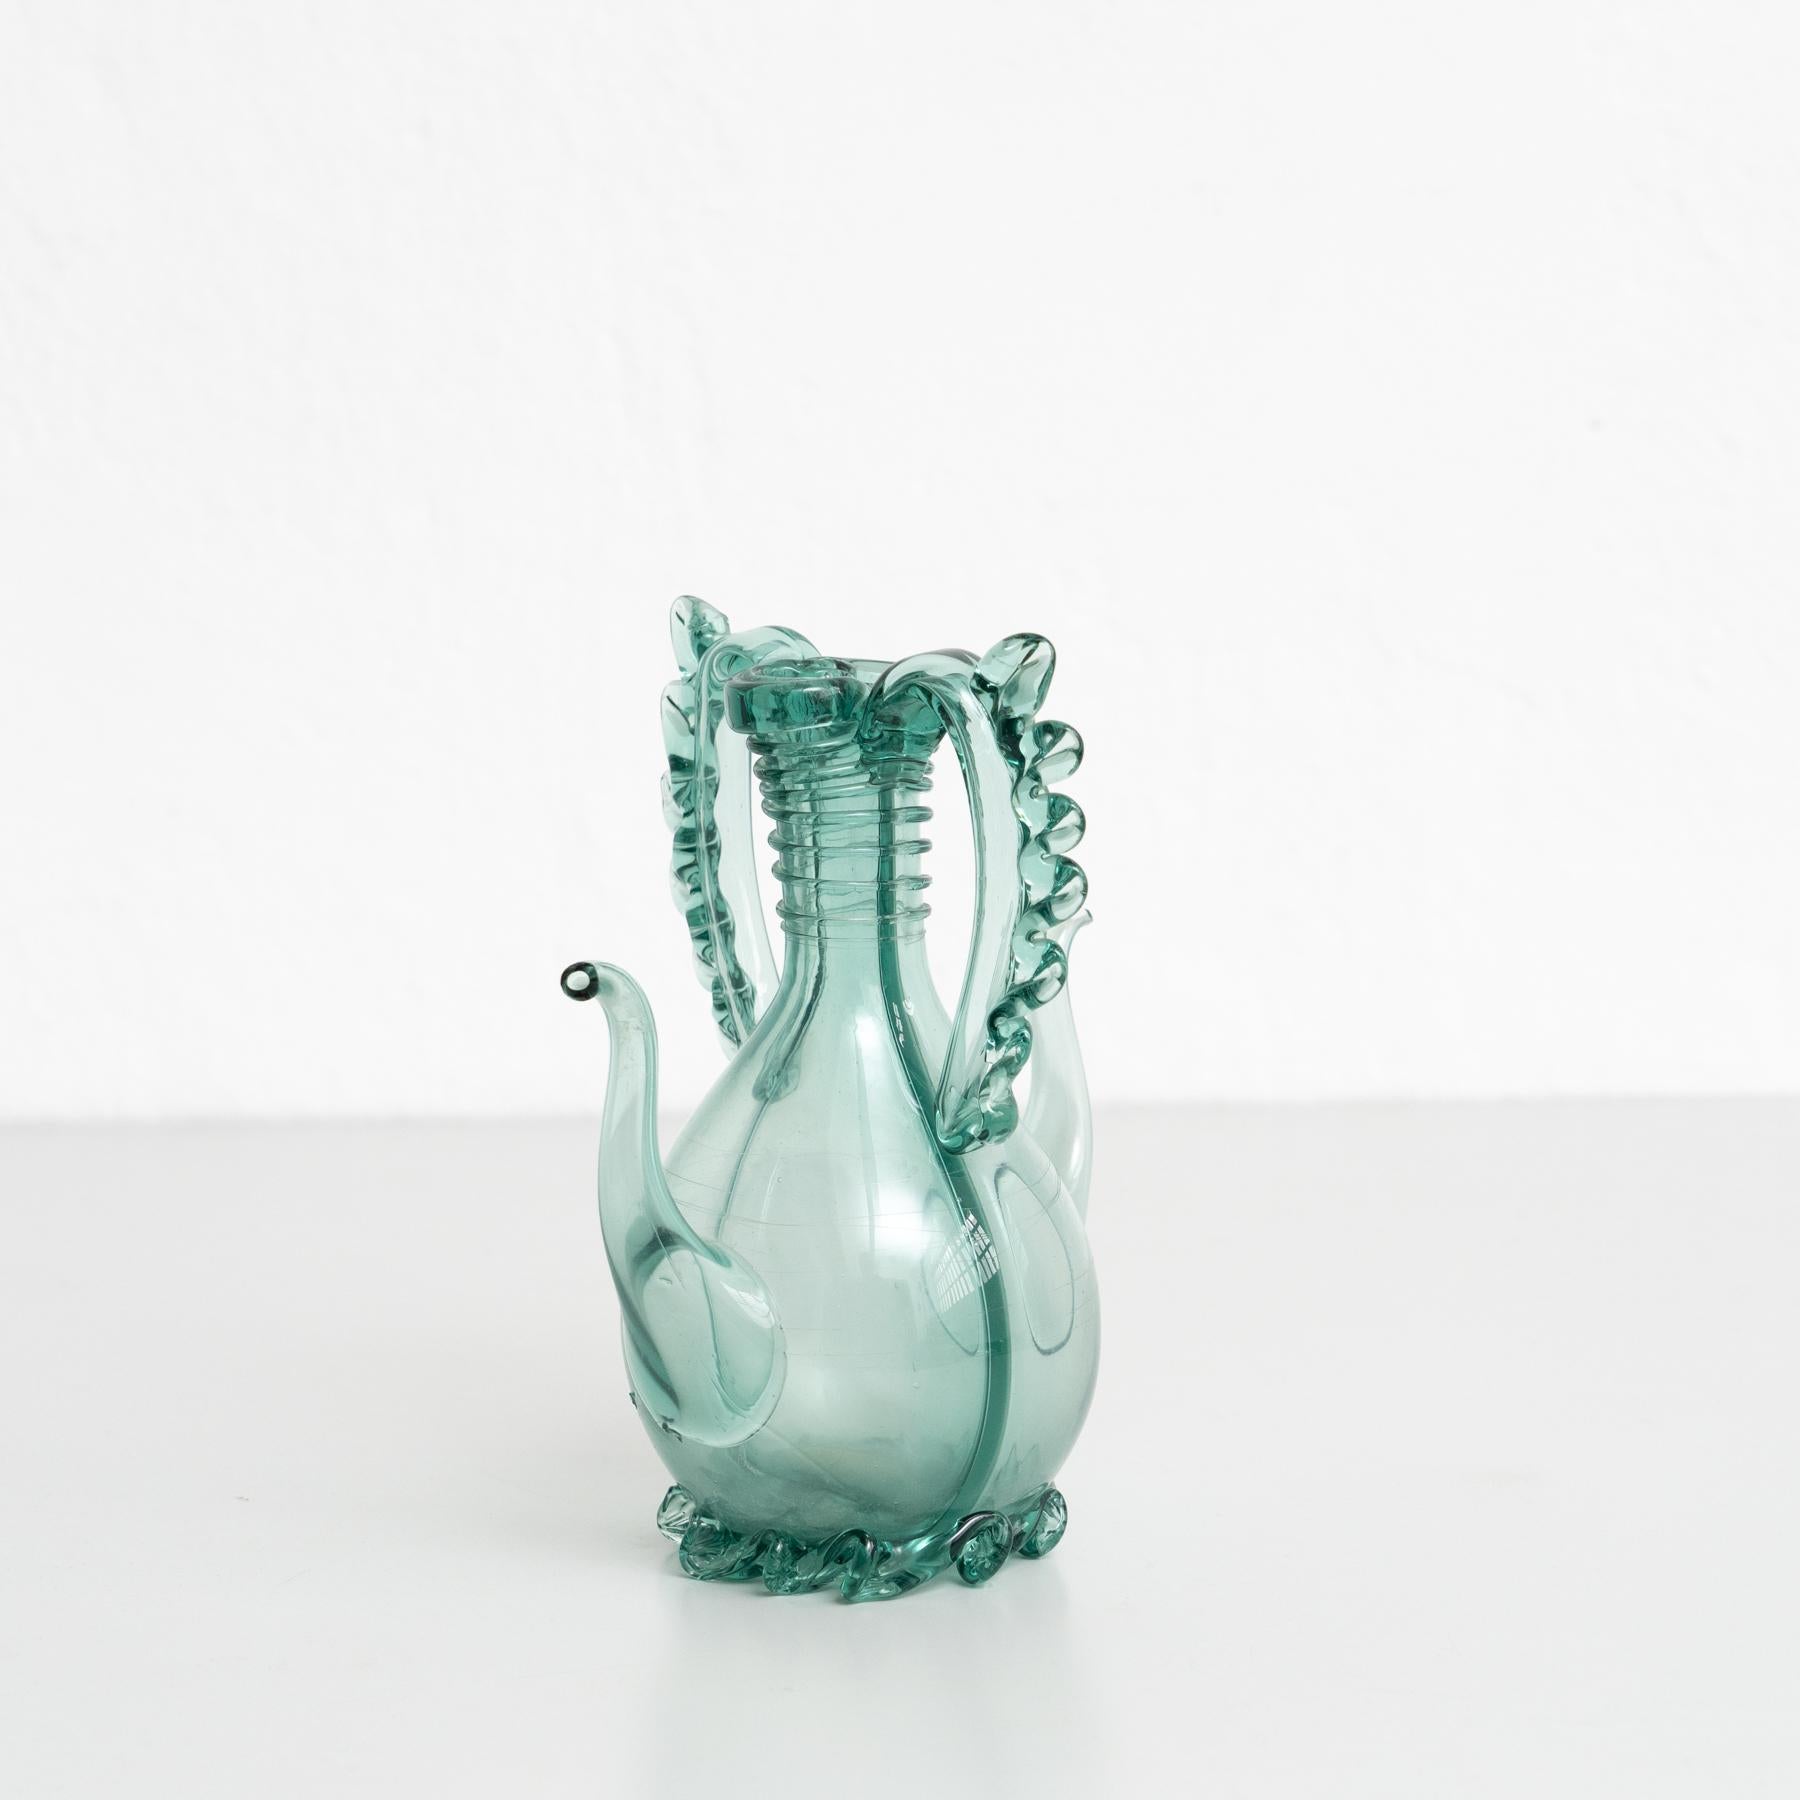 Immerse yourself in nostalgia with this beautiful blue - green blown glass oil cruet dating back to around 1940. This charming piece is a testament to mid-20th-century craftsmanship, evoking the warmth of a bygone era.

The subtlety of the amber